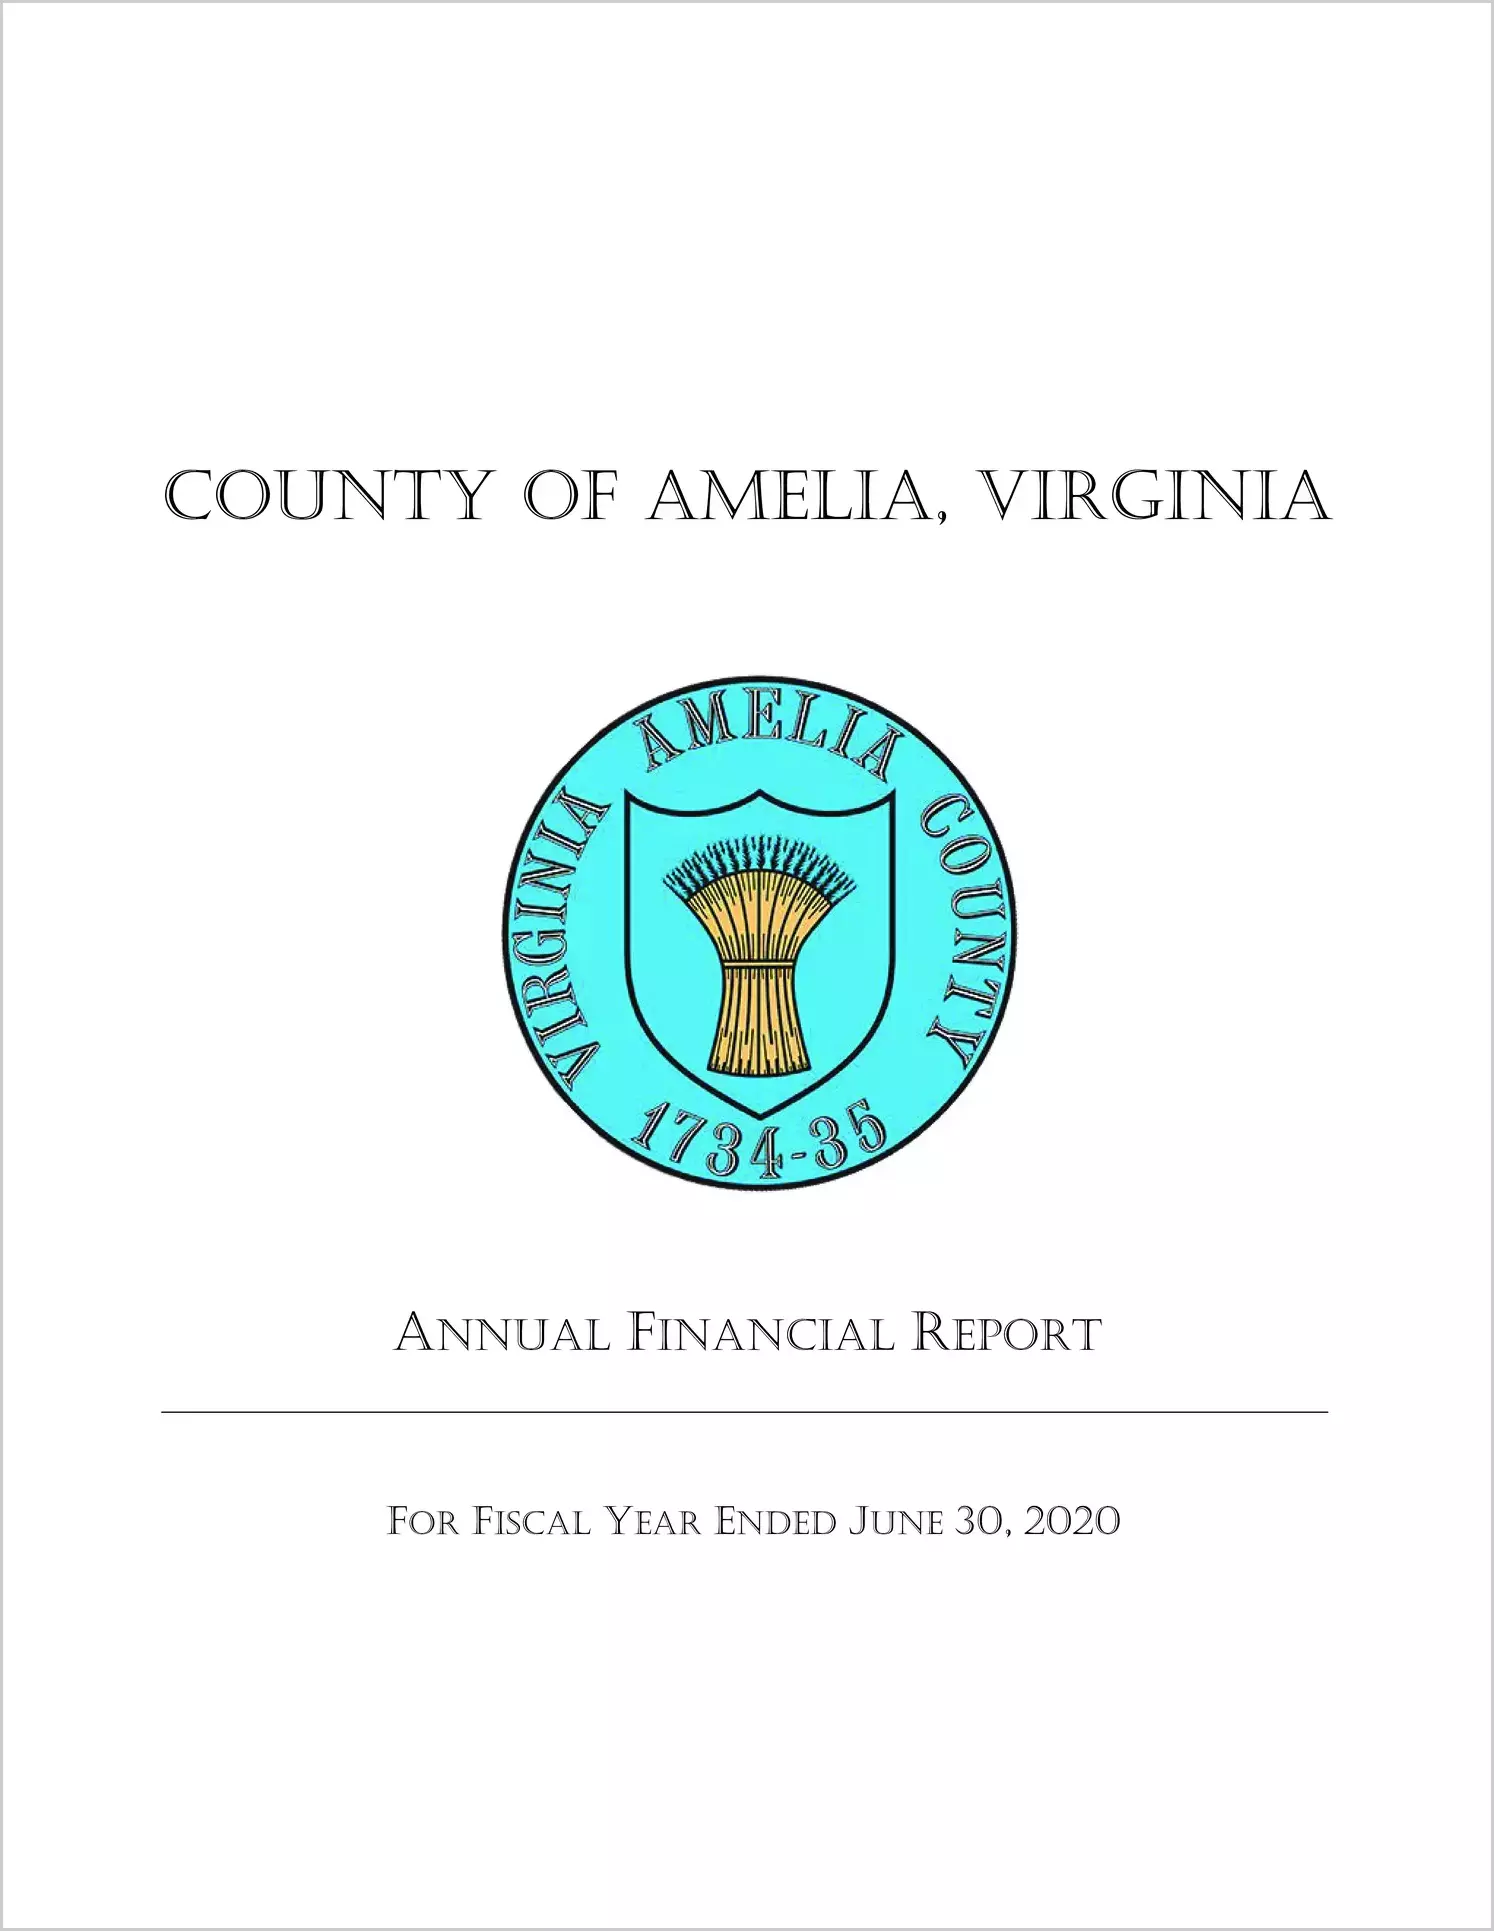 2020 Annual Financial Report for County of Amelia